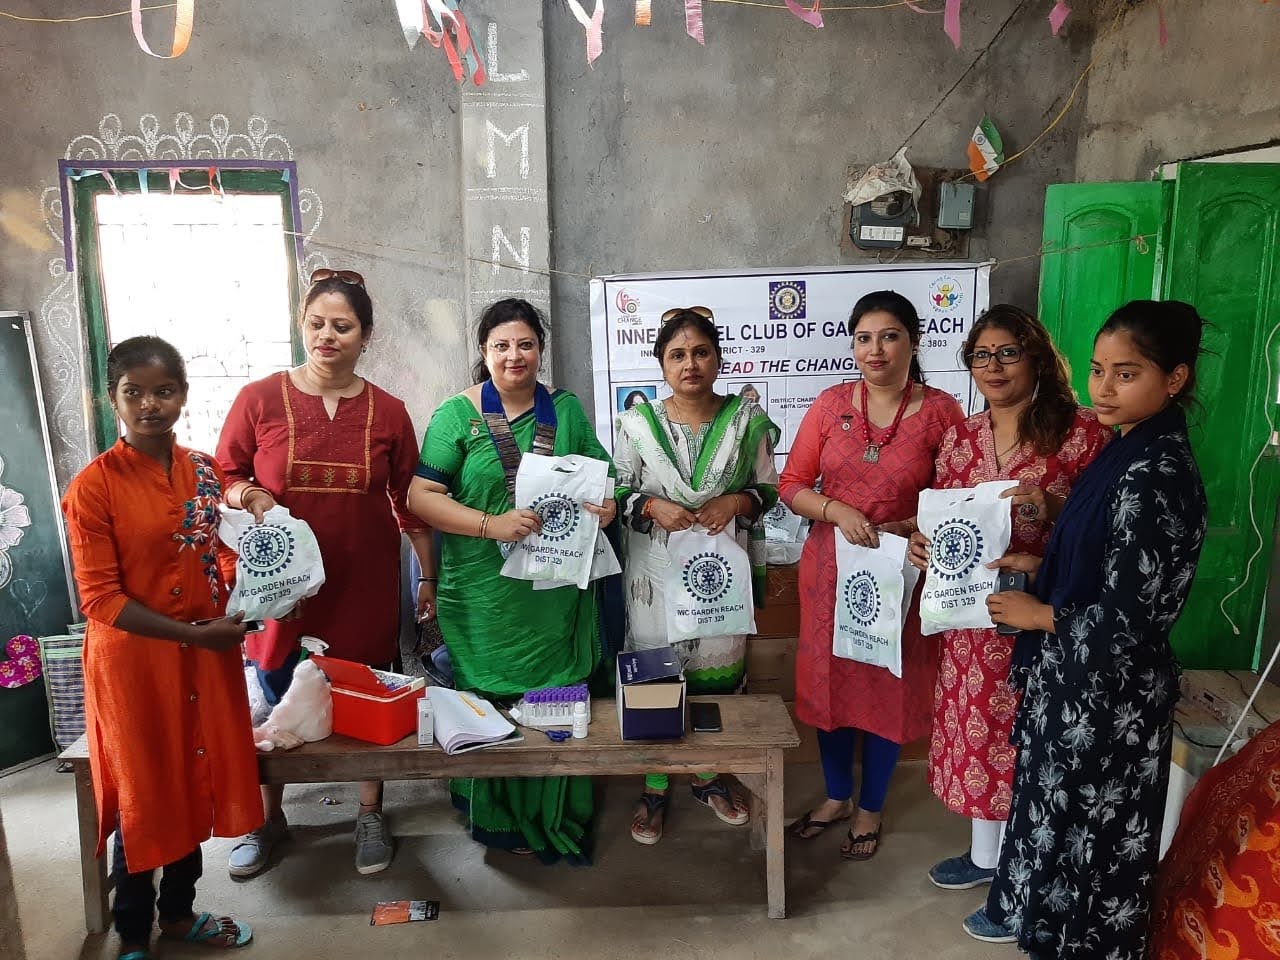 DISTRIBUTION OF SANITARY NAPKINS BY IWC GARDEN REACH